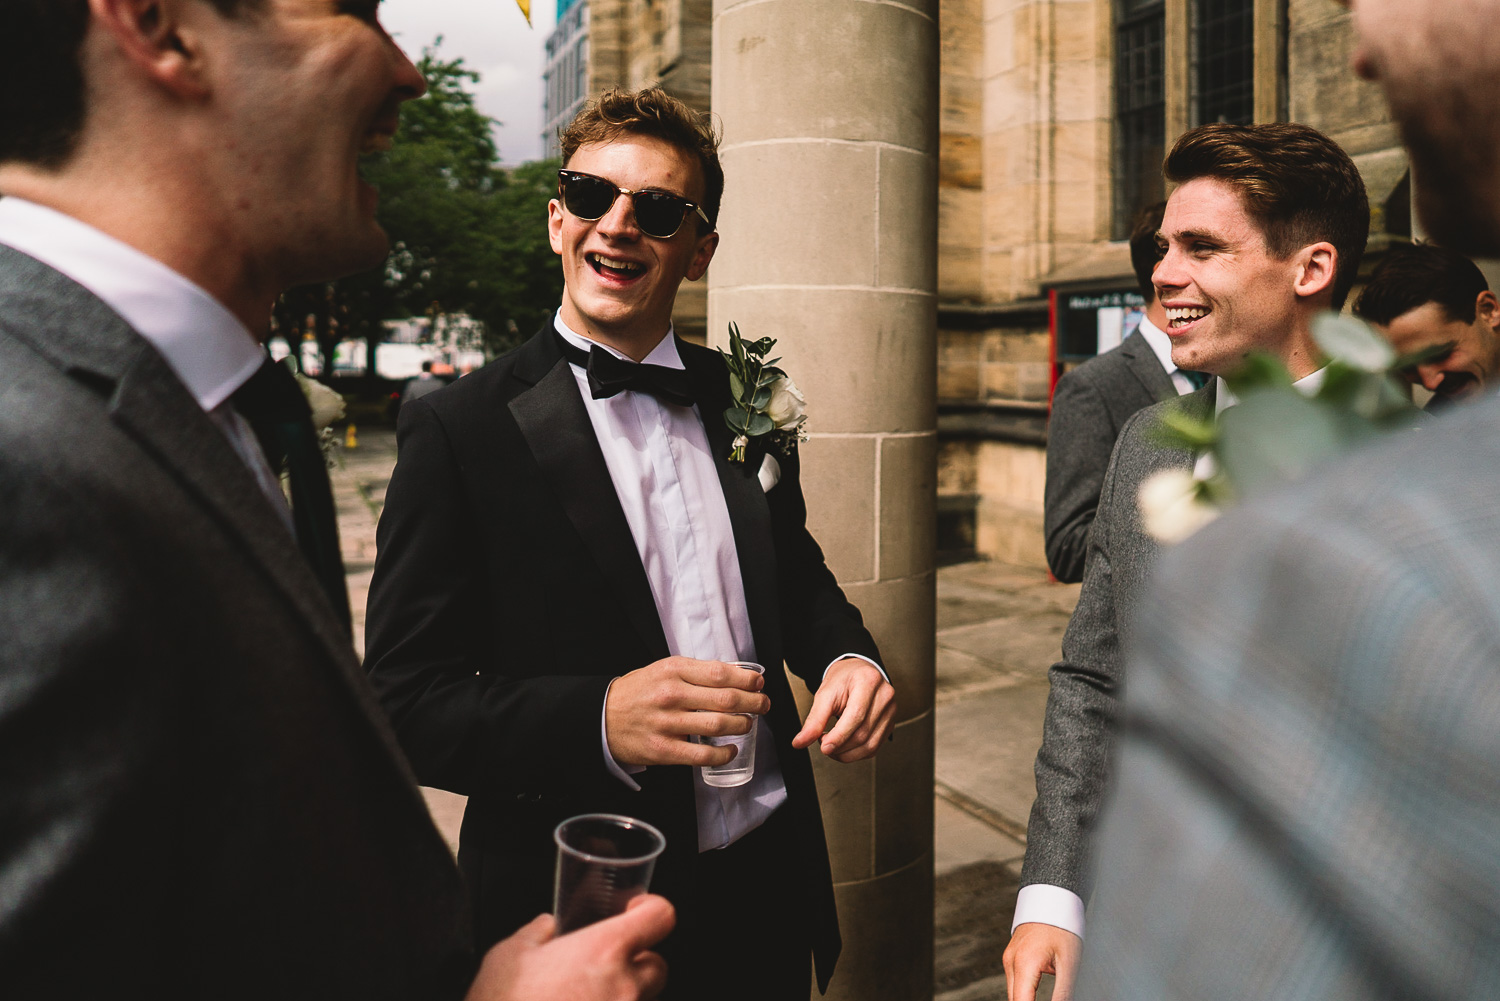 Groom in tux and sunglasses laughing and having fun with Groomsmen outside of Sheffield wedding venue before the ceremony in Sheffield